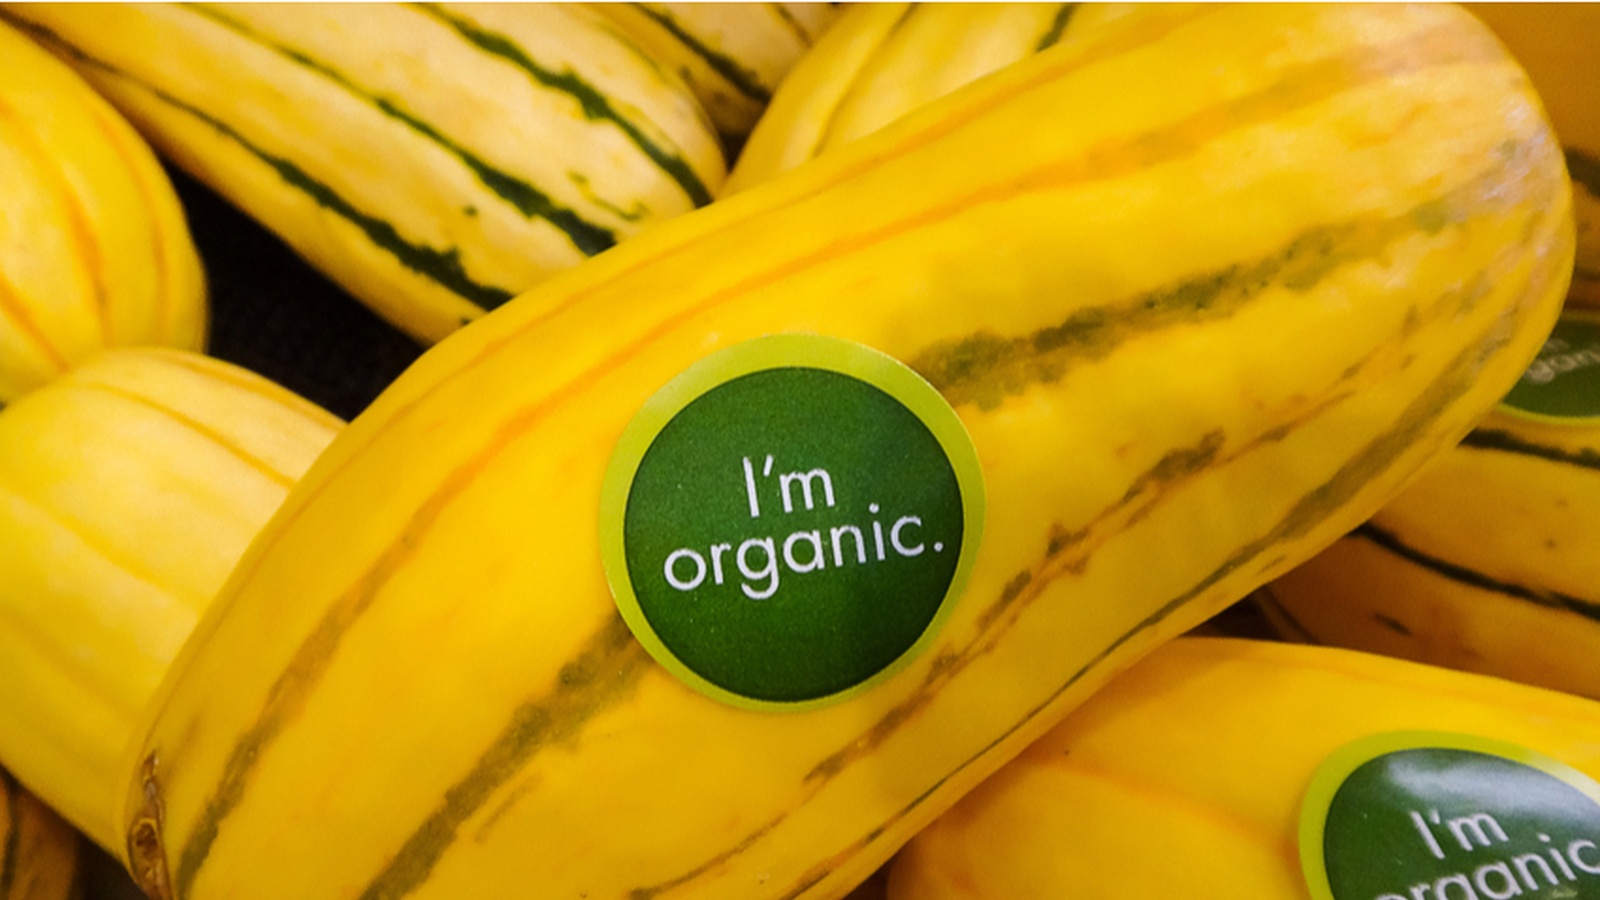 Fresh, Natural, Organic - What Do All These Labels Really Mean?